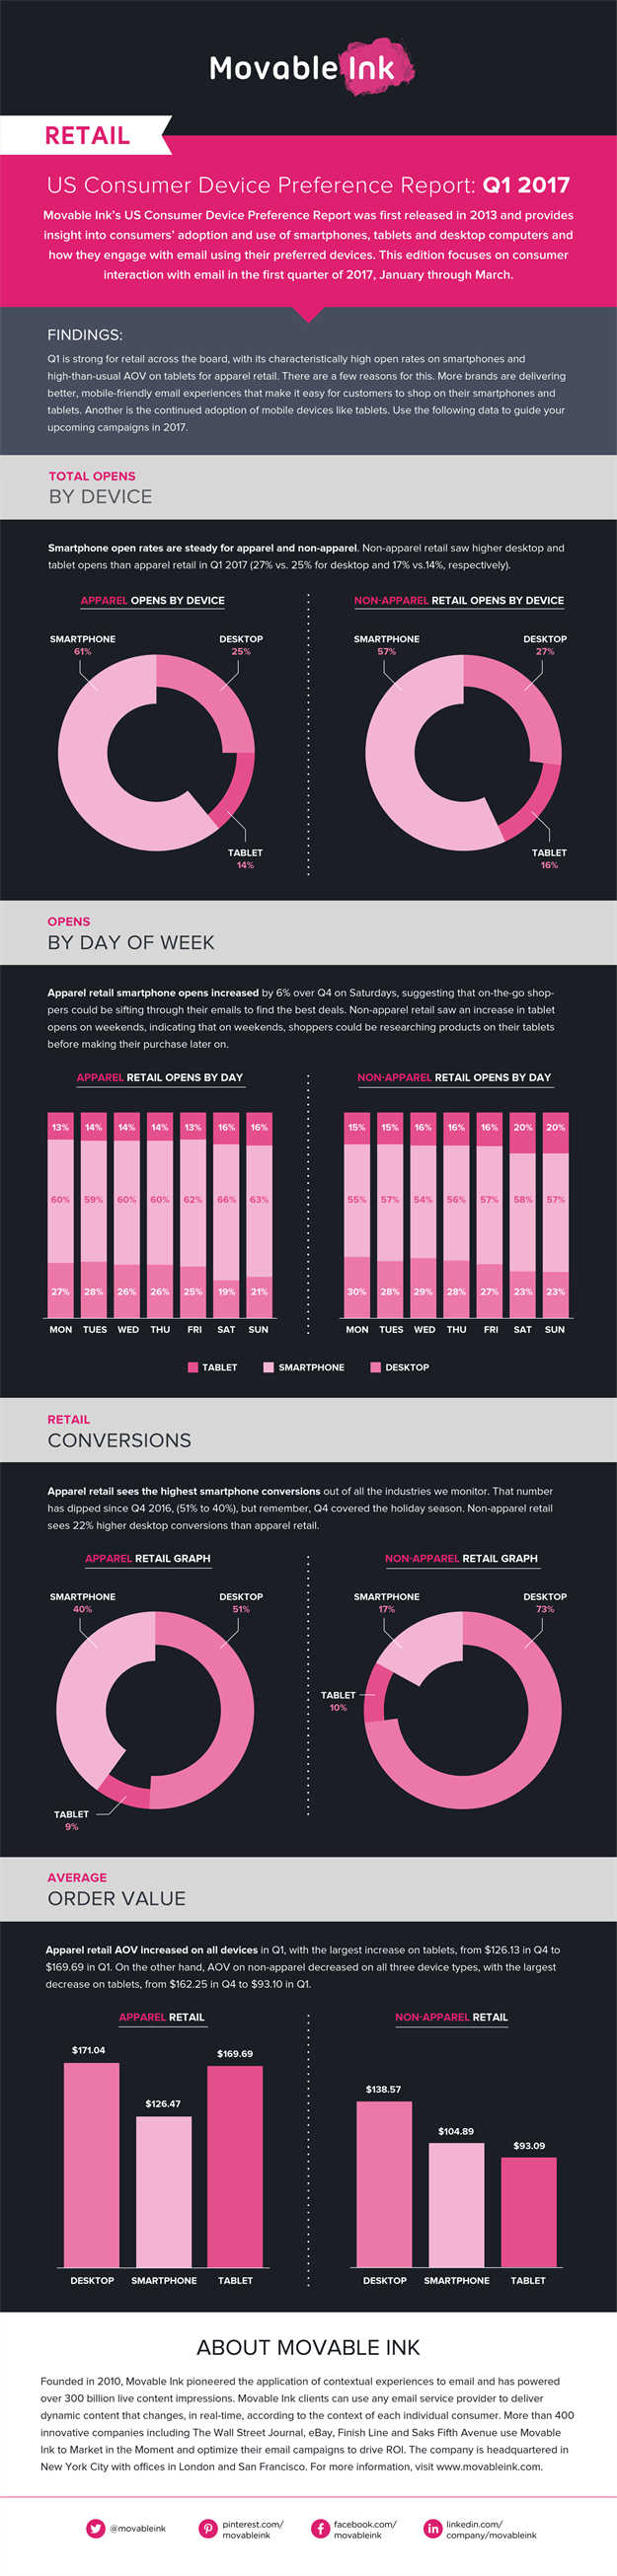 CDR_Infographic_RETAIL_r1-01